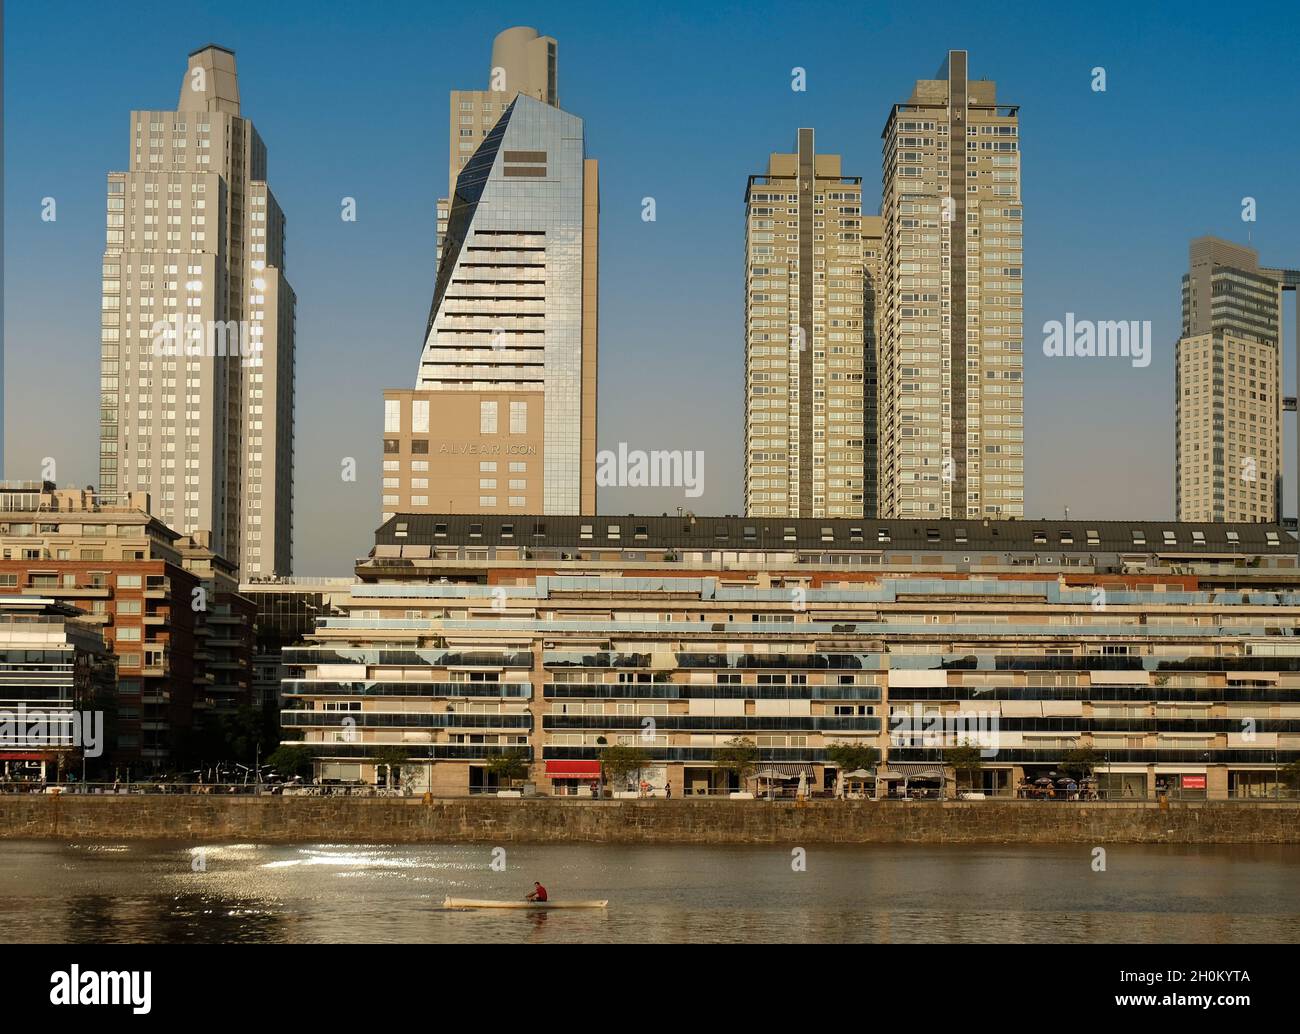 View to the real estate and skyscrapers of Puerto Madero district. Stock Photo